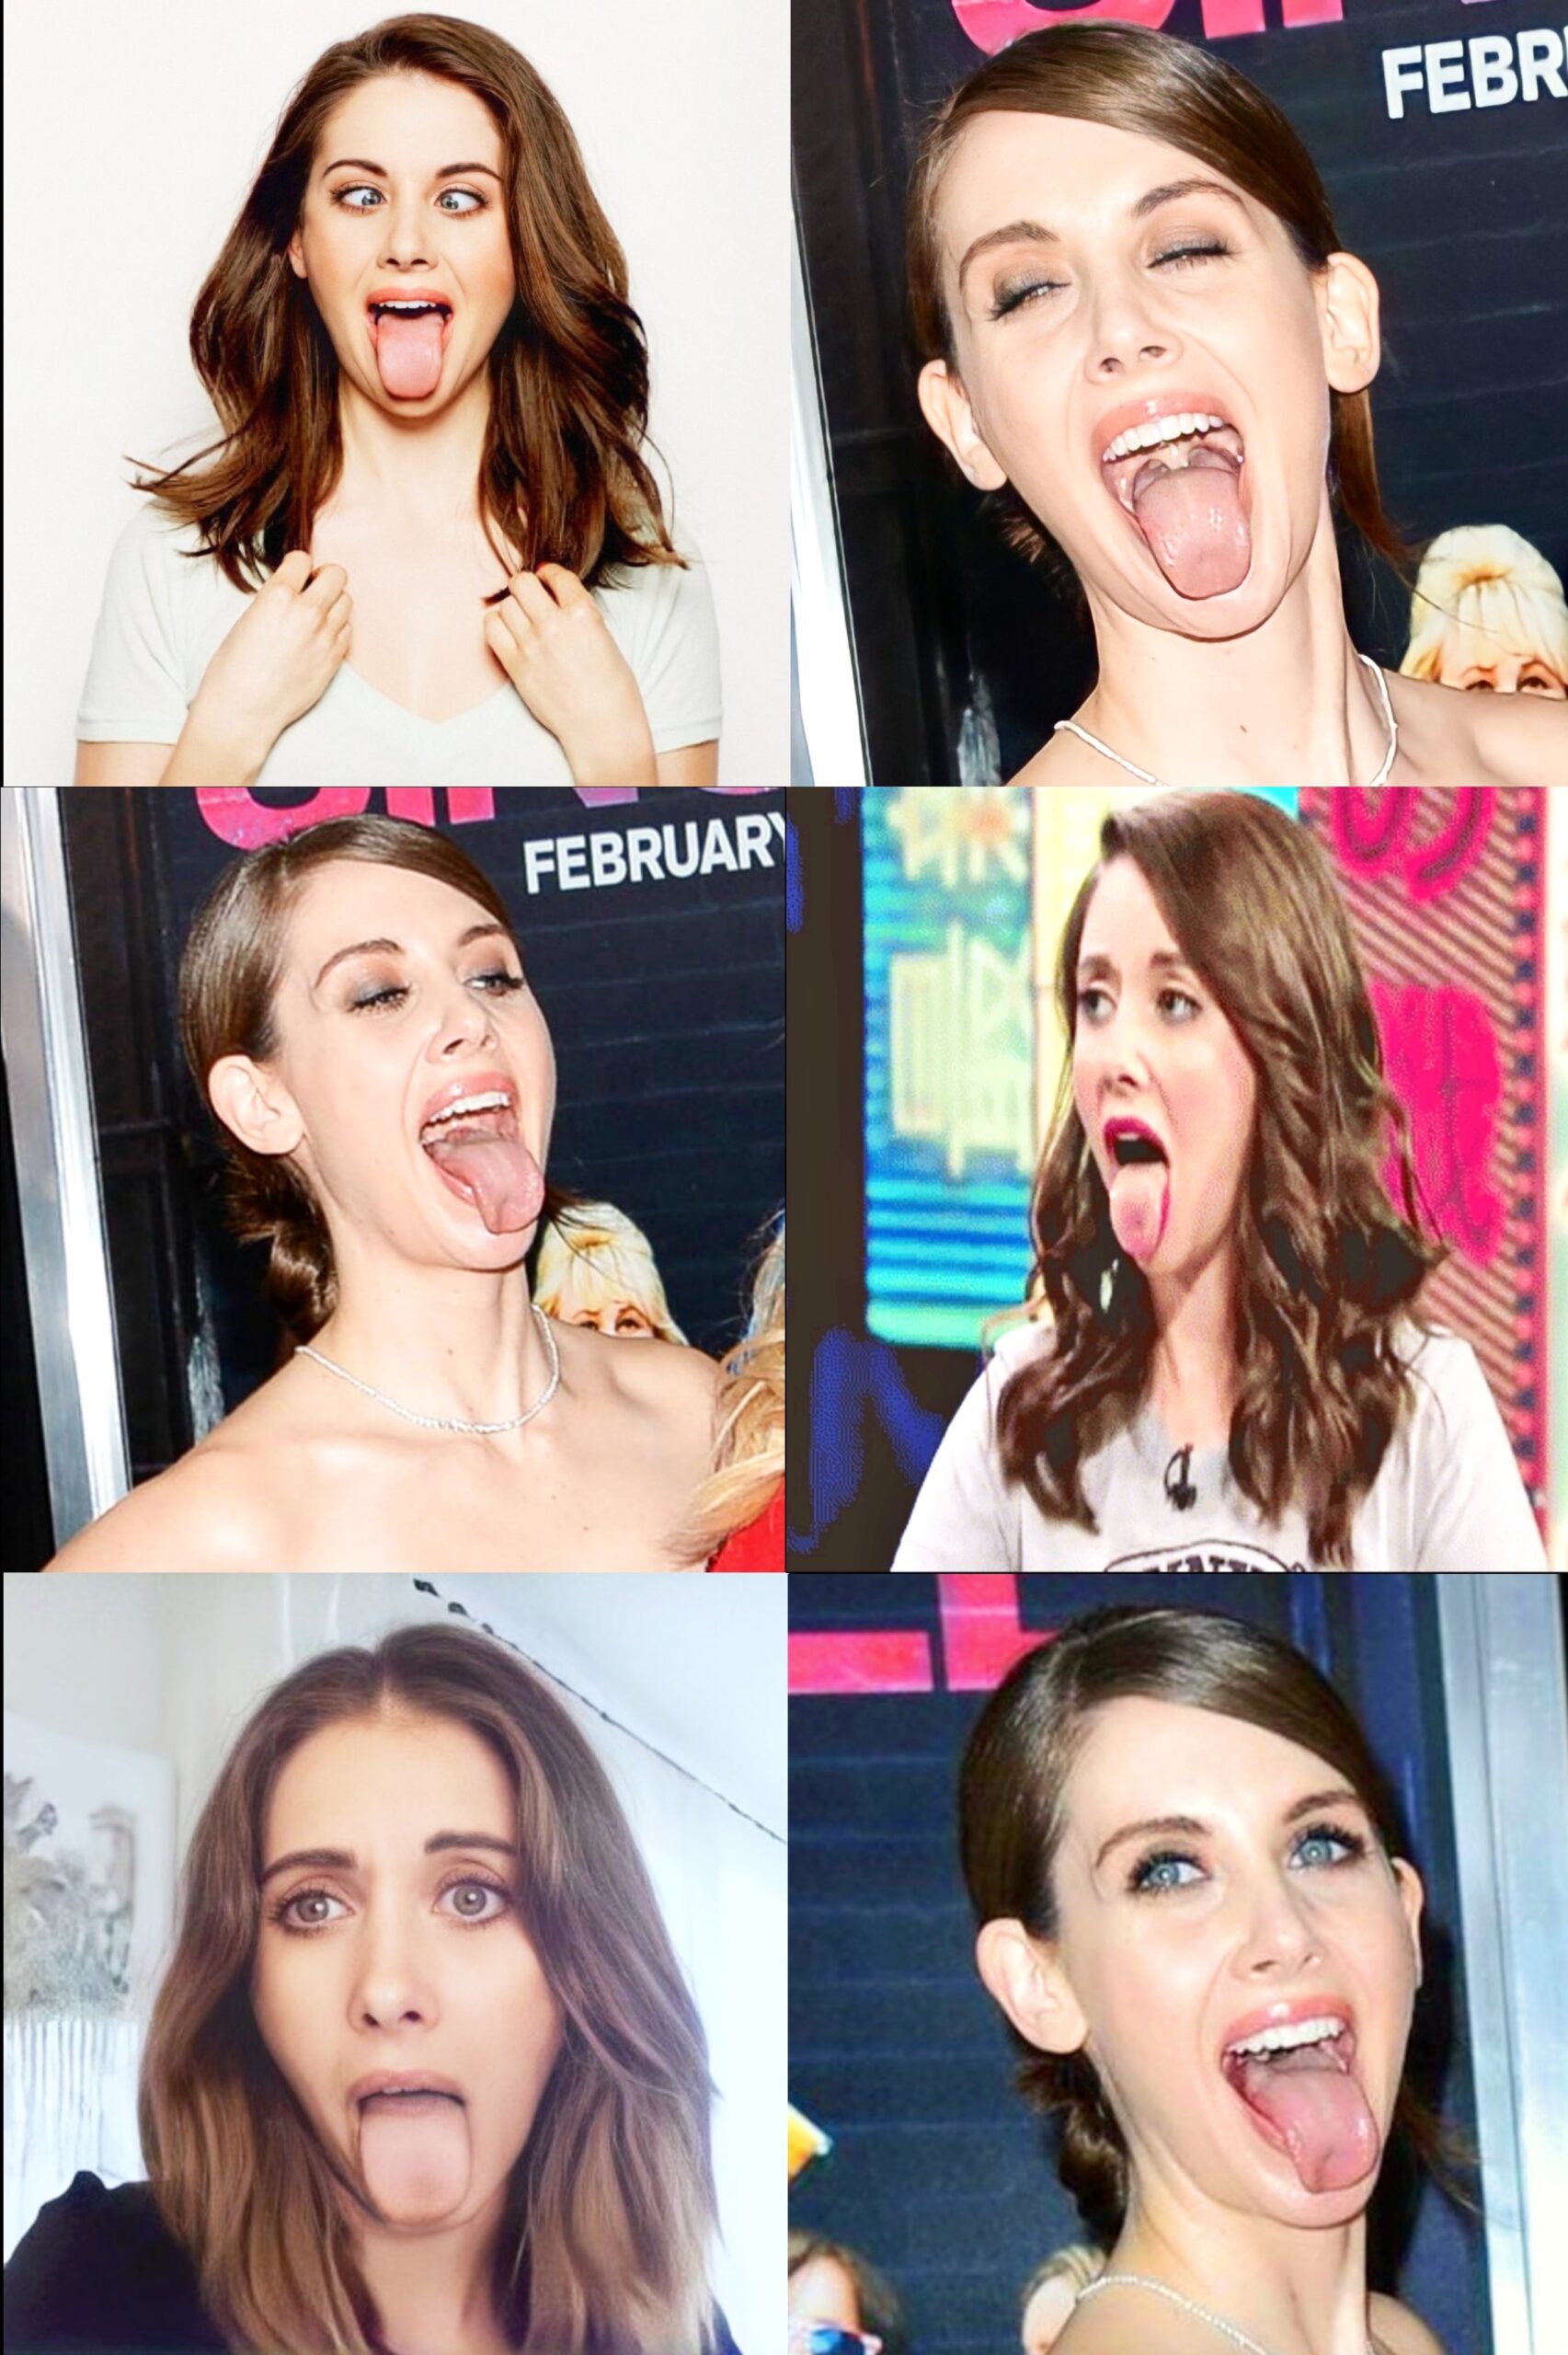 Alison Brie with her sexy tongue out is such a